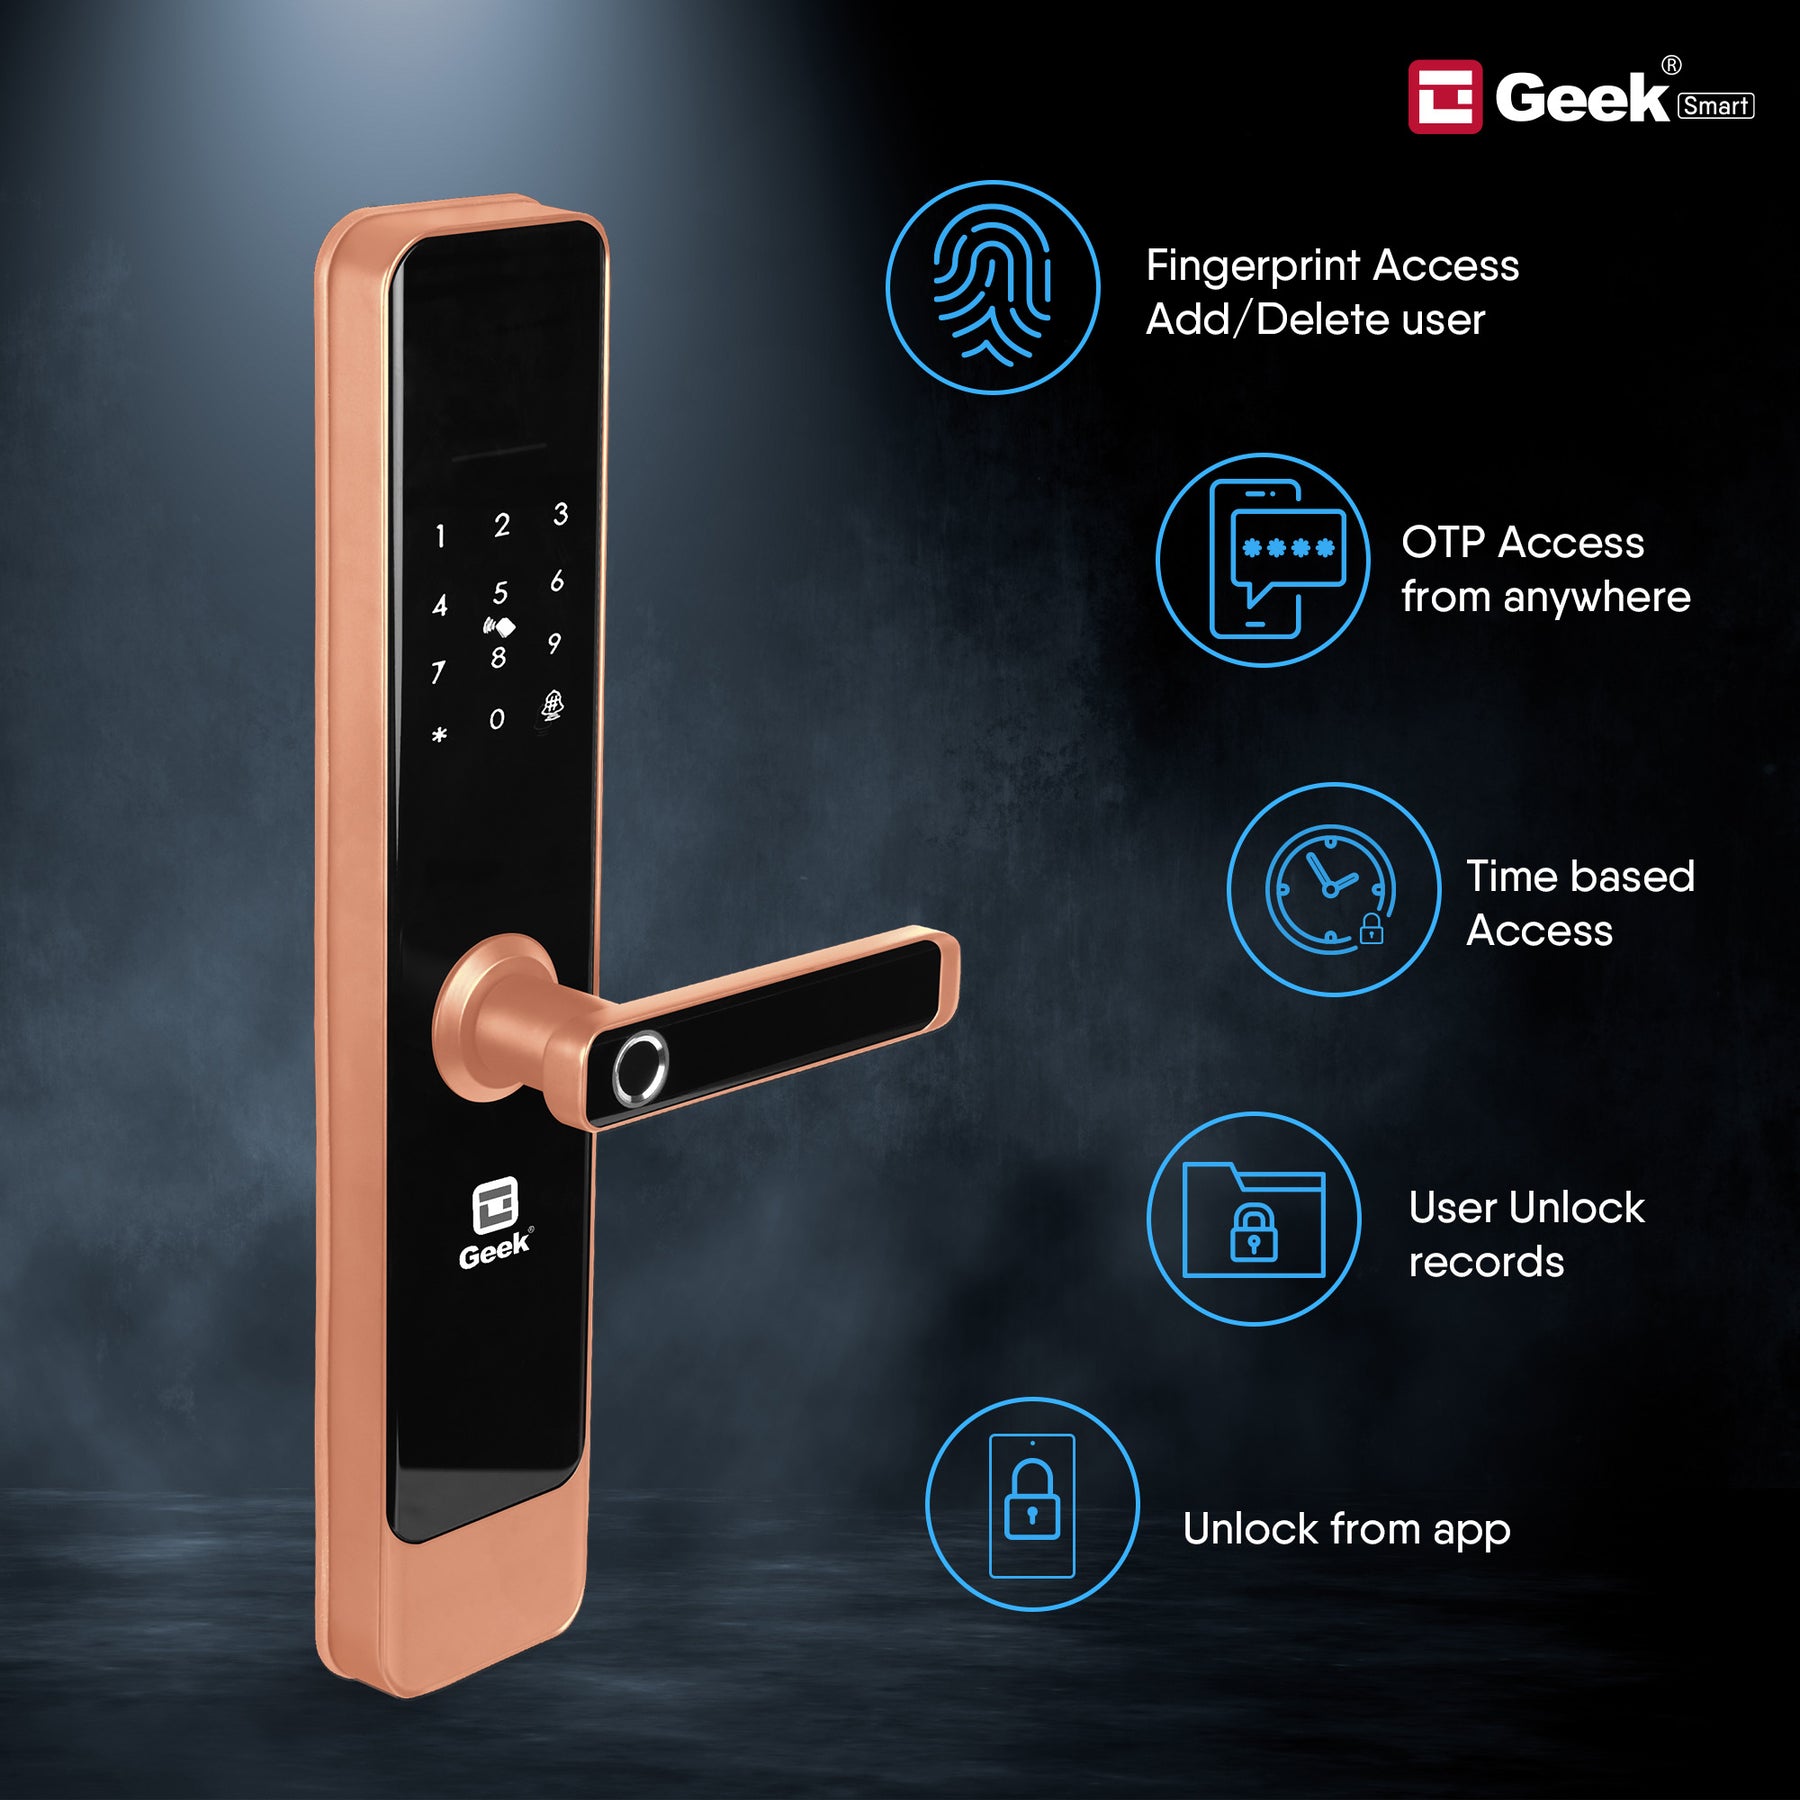 Geek E908 Wi-Fi Enabled 5-in-1 Smart Digital Door Lock With 5 Locking Bolts, App Support and Biometric Fingerprint Access (Rose Gold)